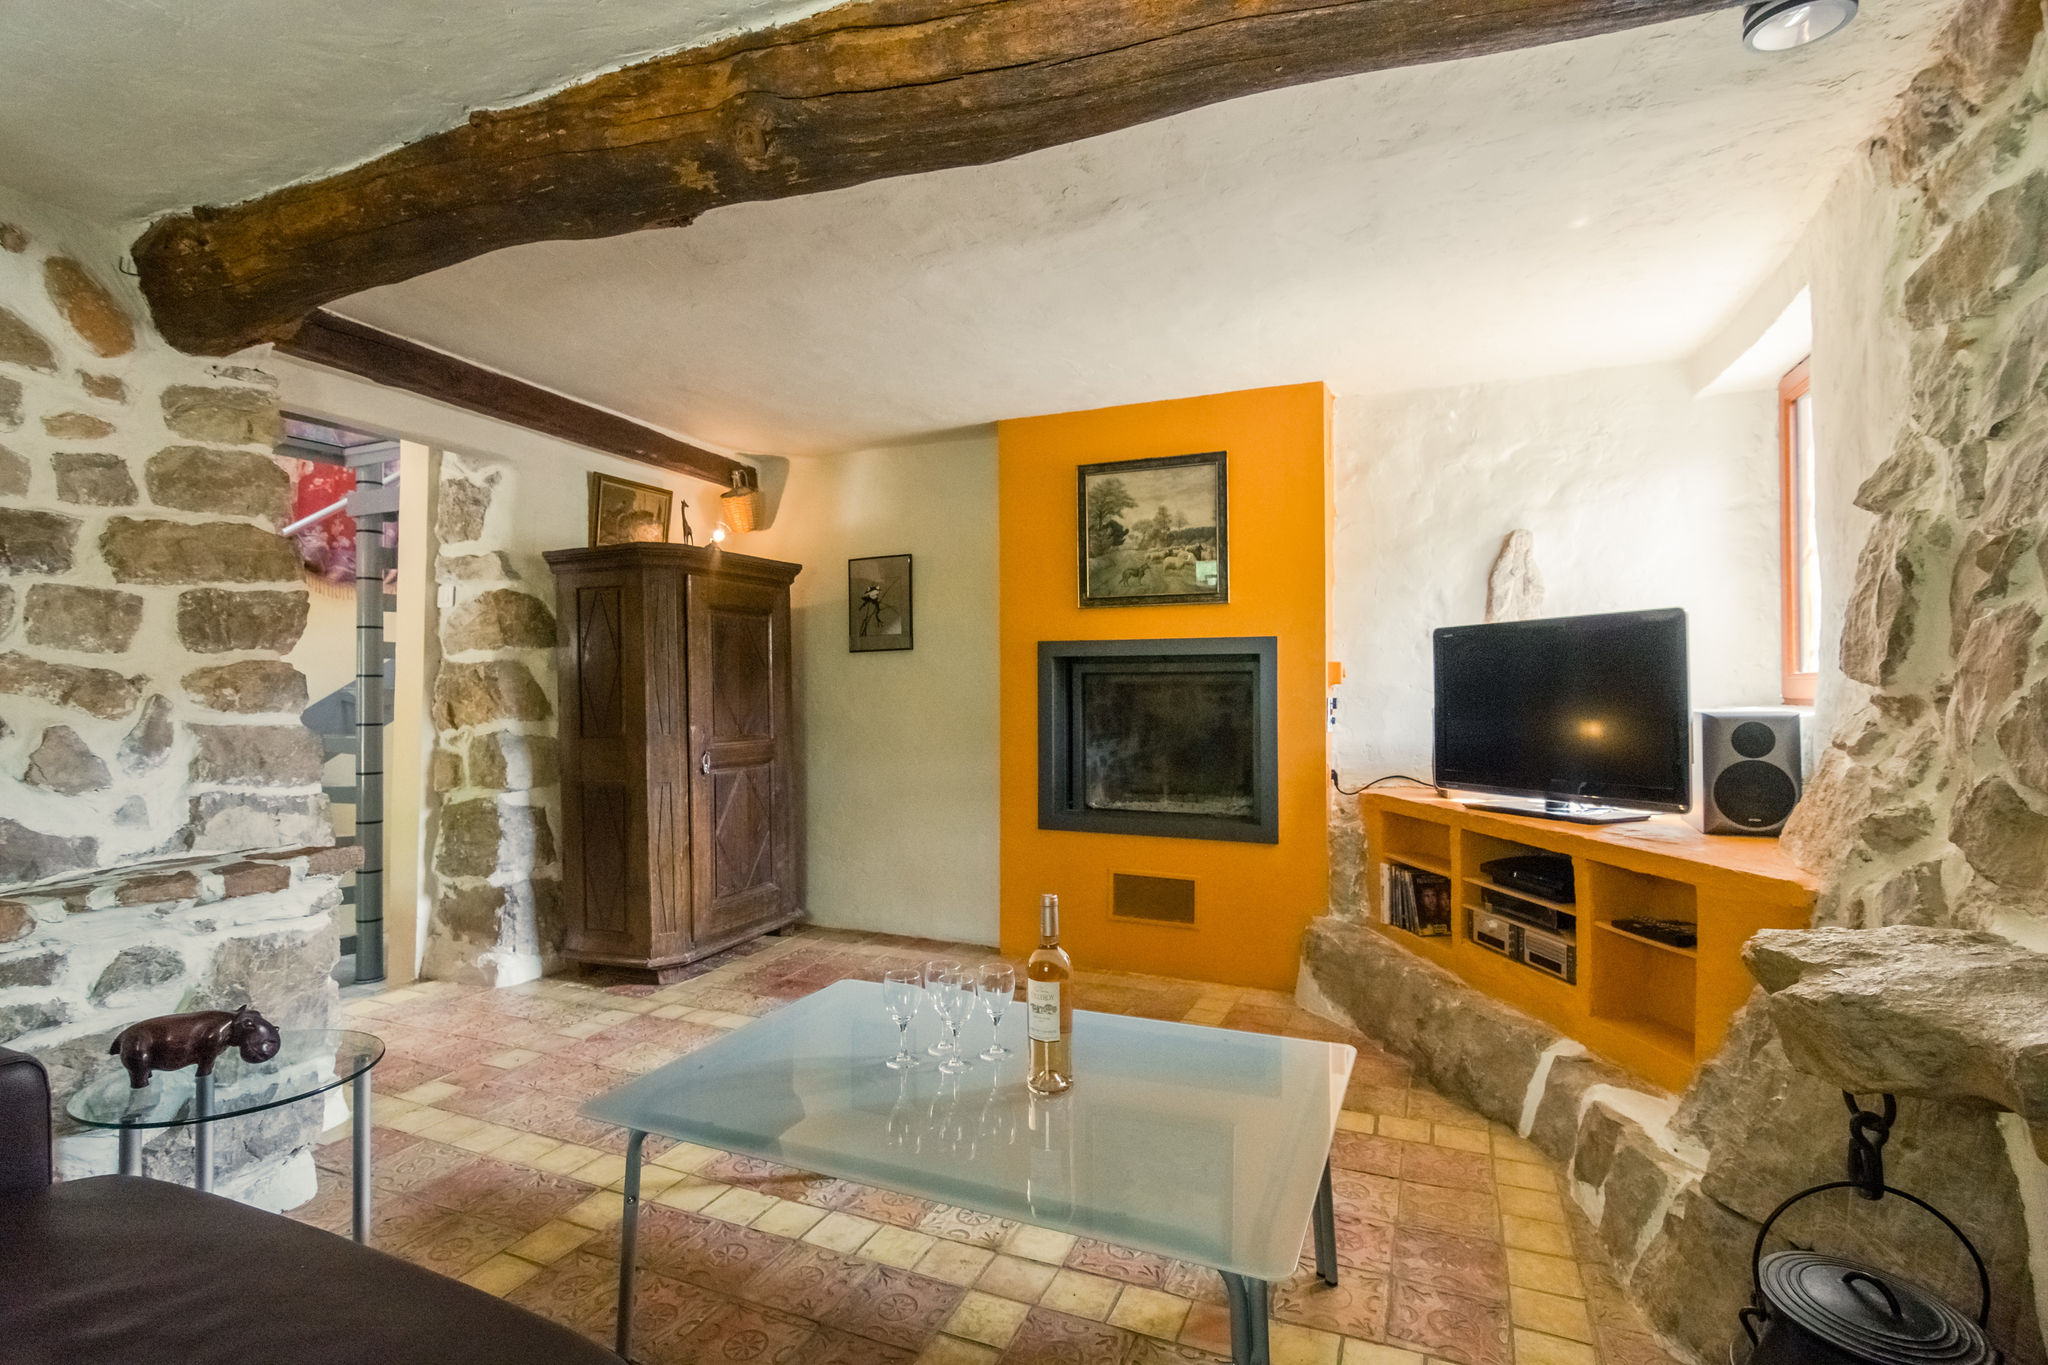 Traditional Holiday Home with Swimming Pool in Fayence